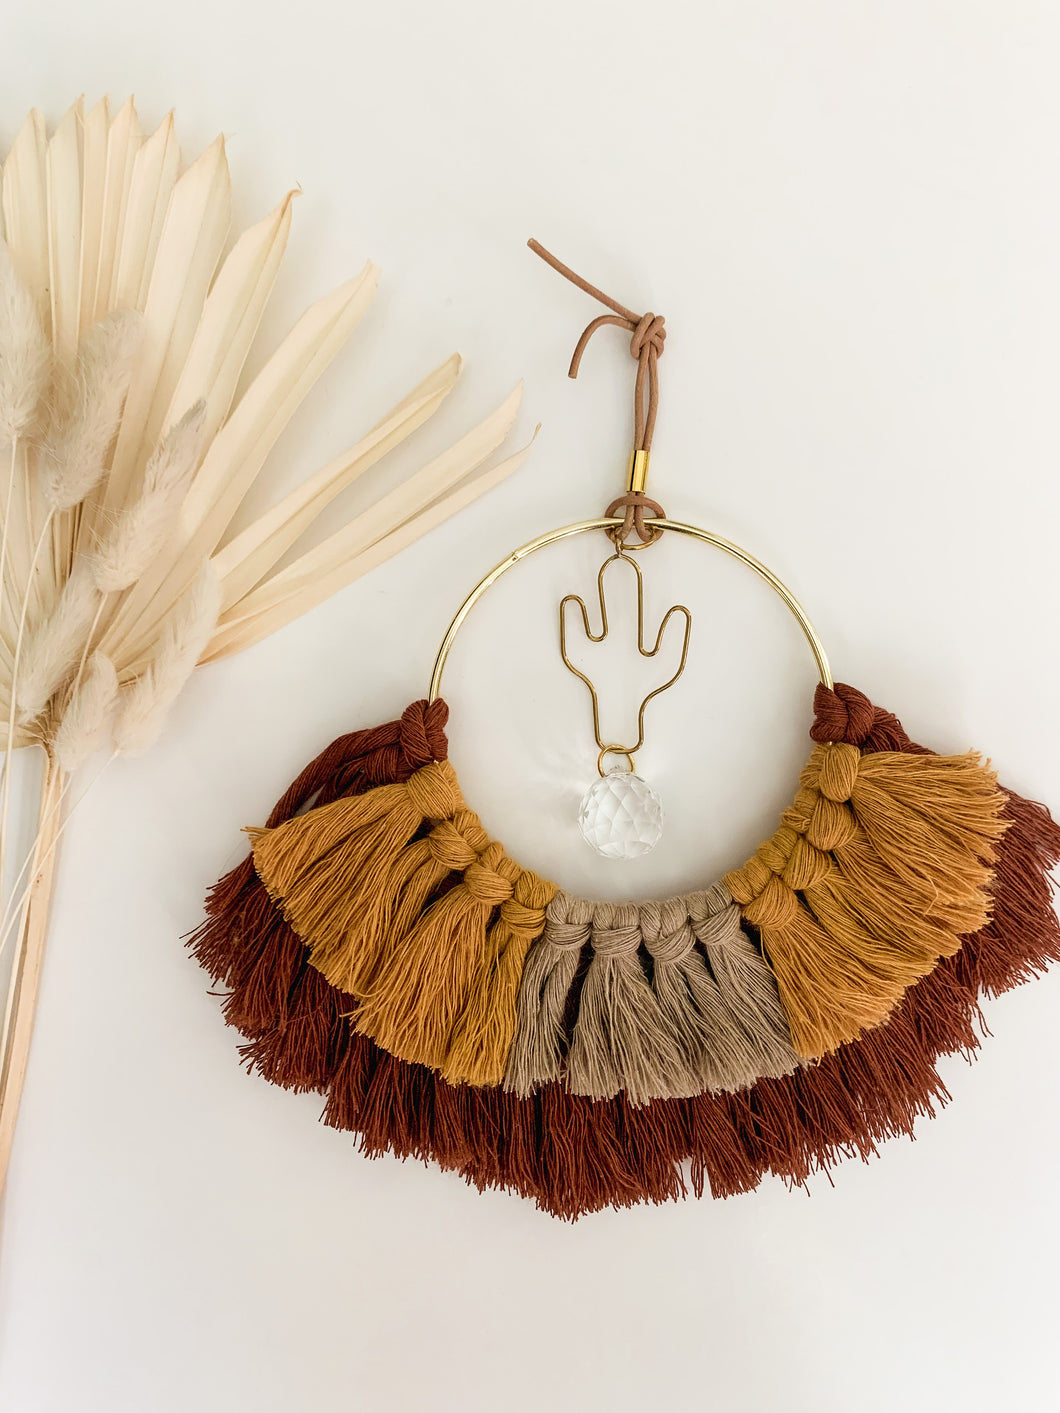 A macrame suncatcher with gold cactus charm and mix of maroon, mustard yellow, and tan cotton fringe